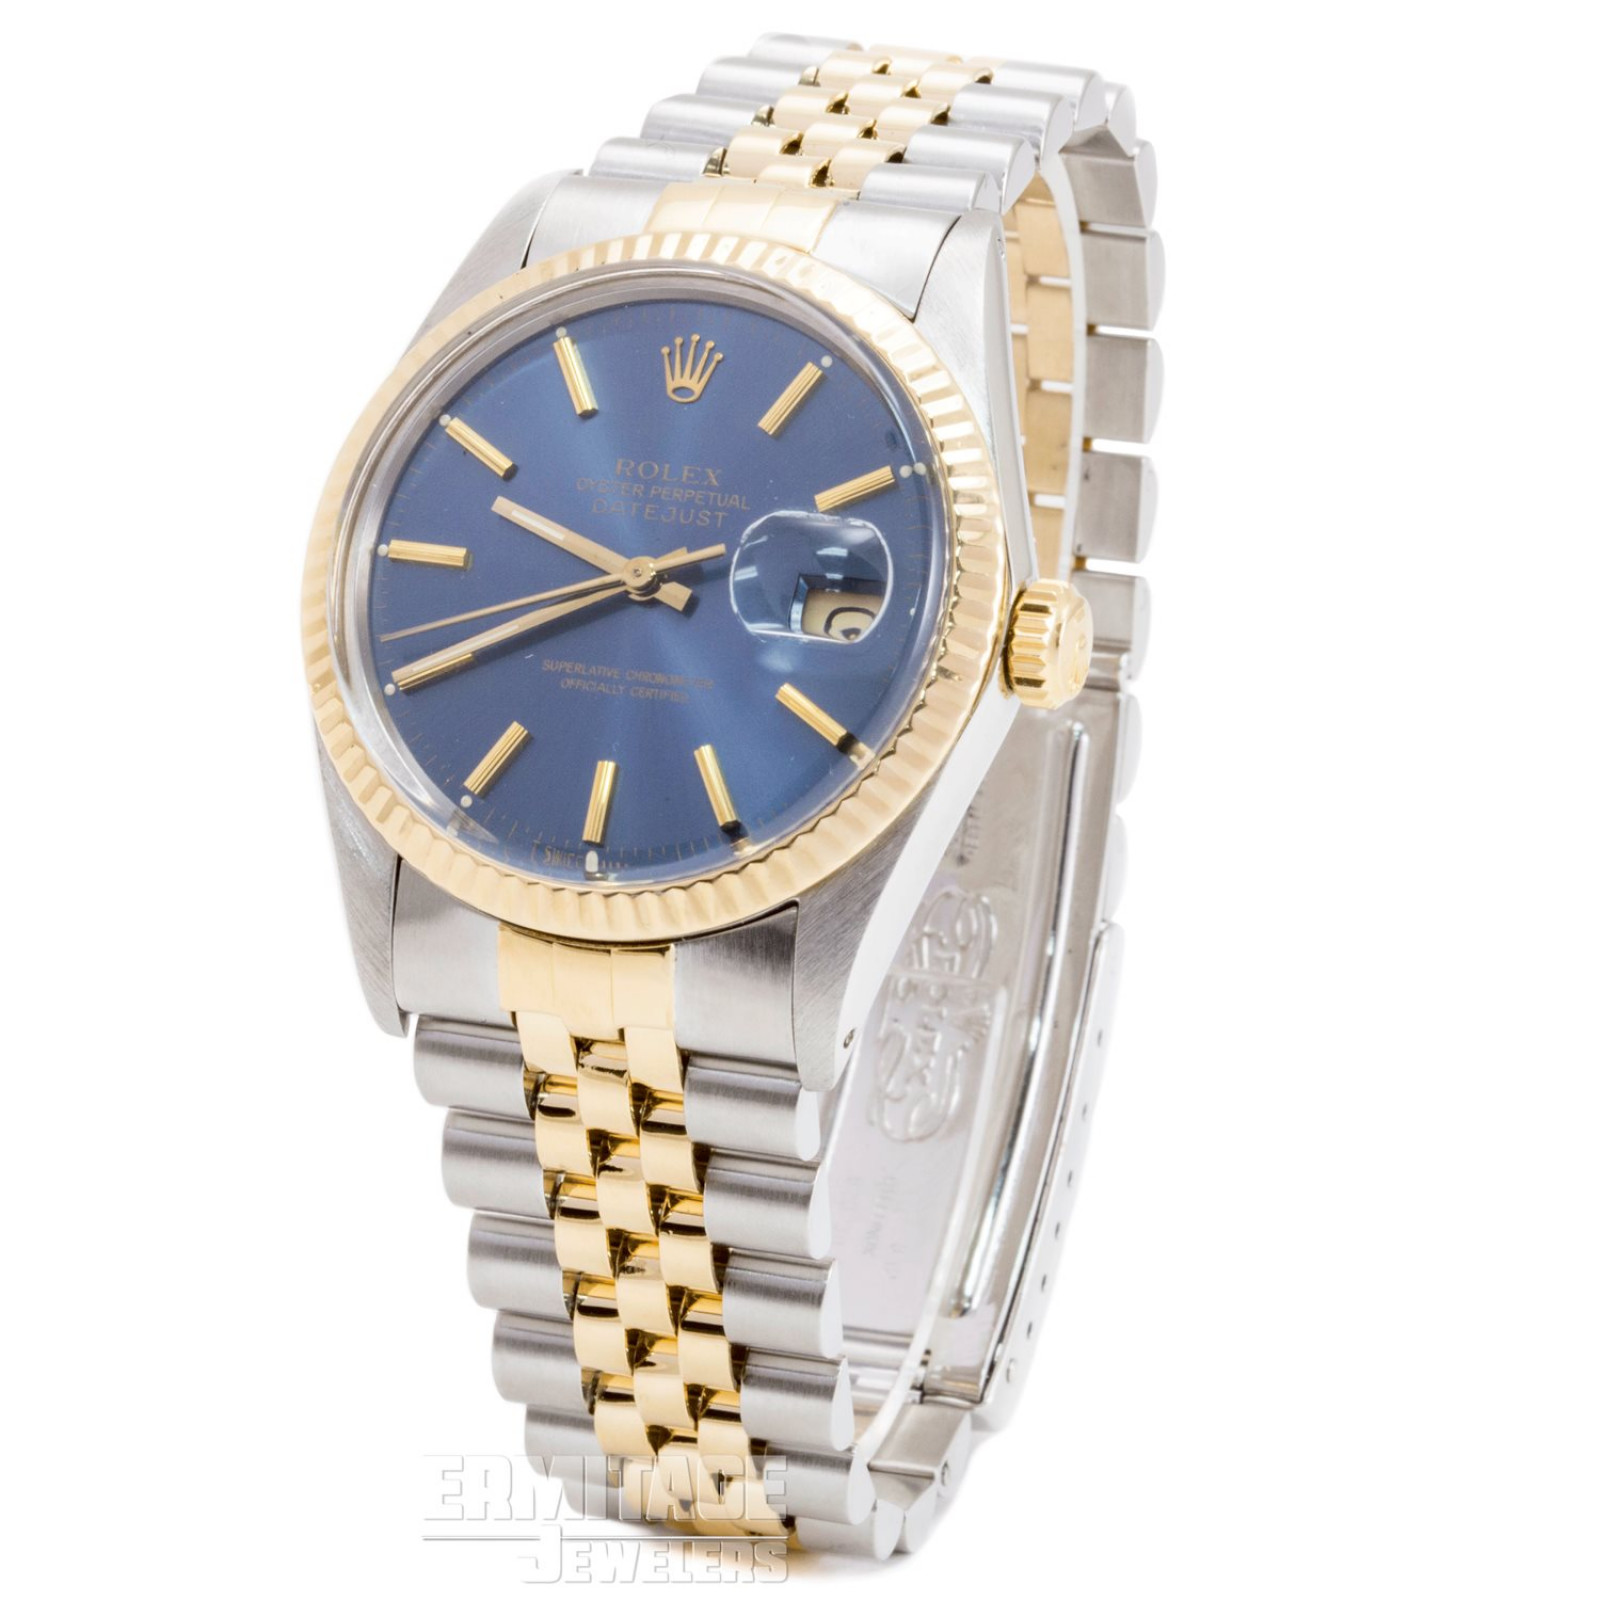 36 mm Rolex Datejust 16013 Gold & Steel on Jubilee with Blue Dial